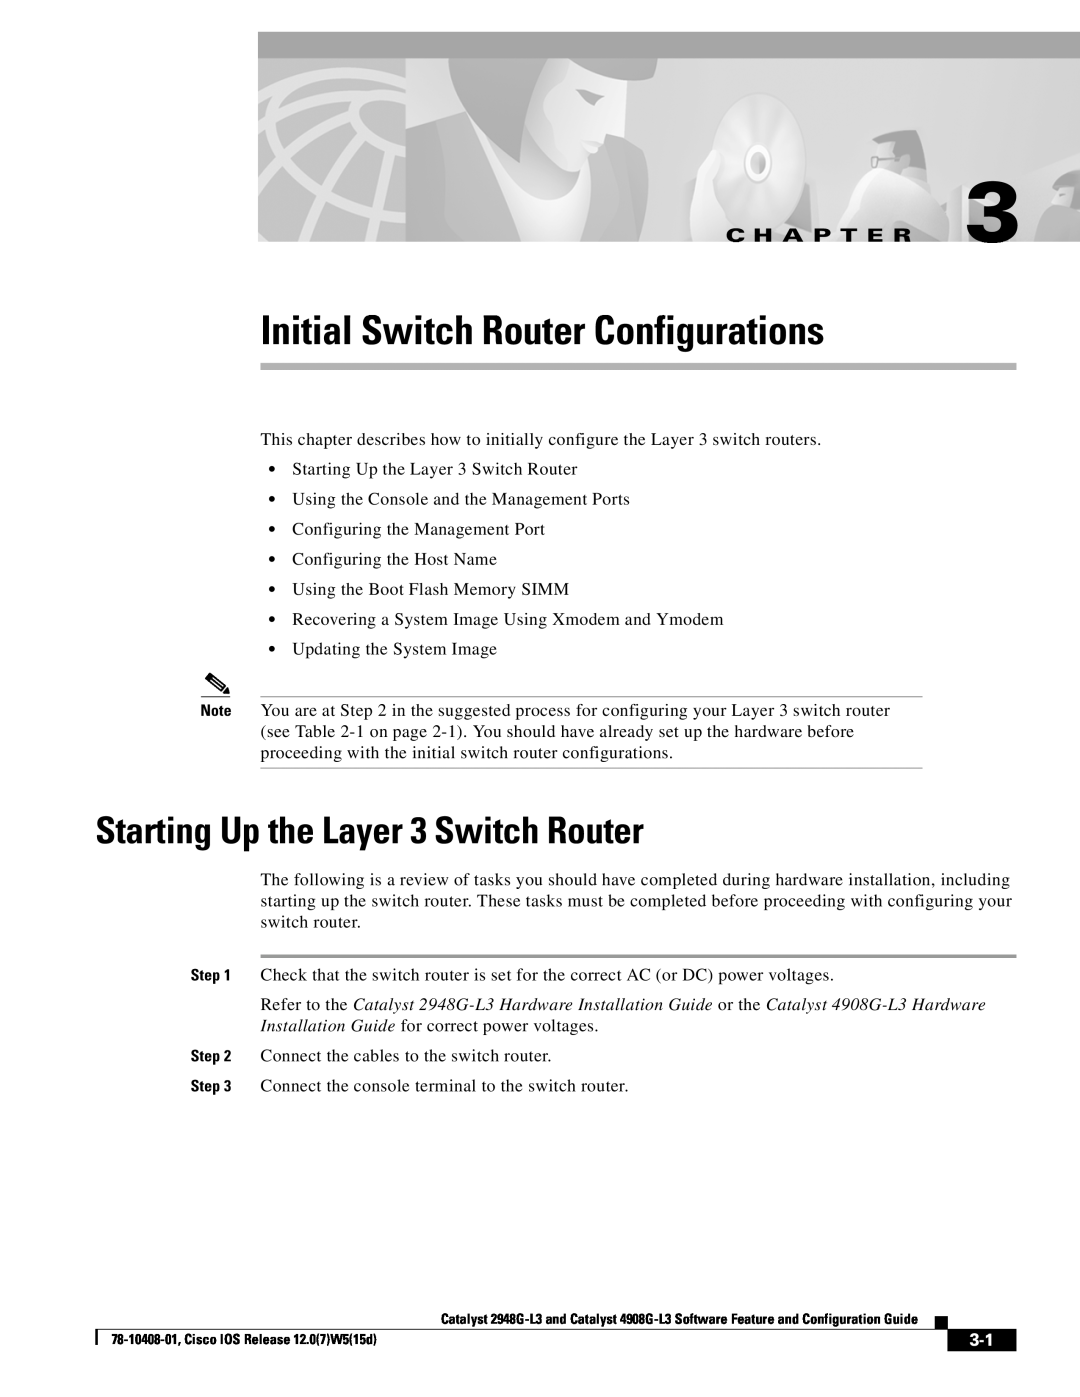 Cisco Systems manual Starting Up the Layer 3 Switch Router, Initial Switch Router Configurations, C H A P T E R 